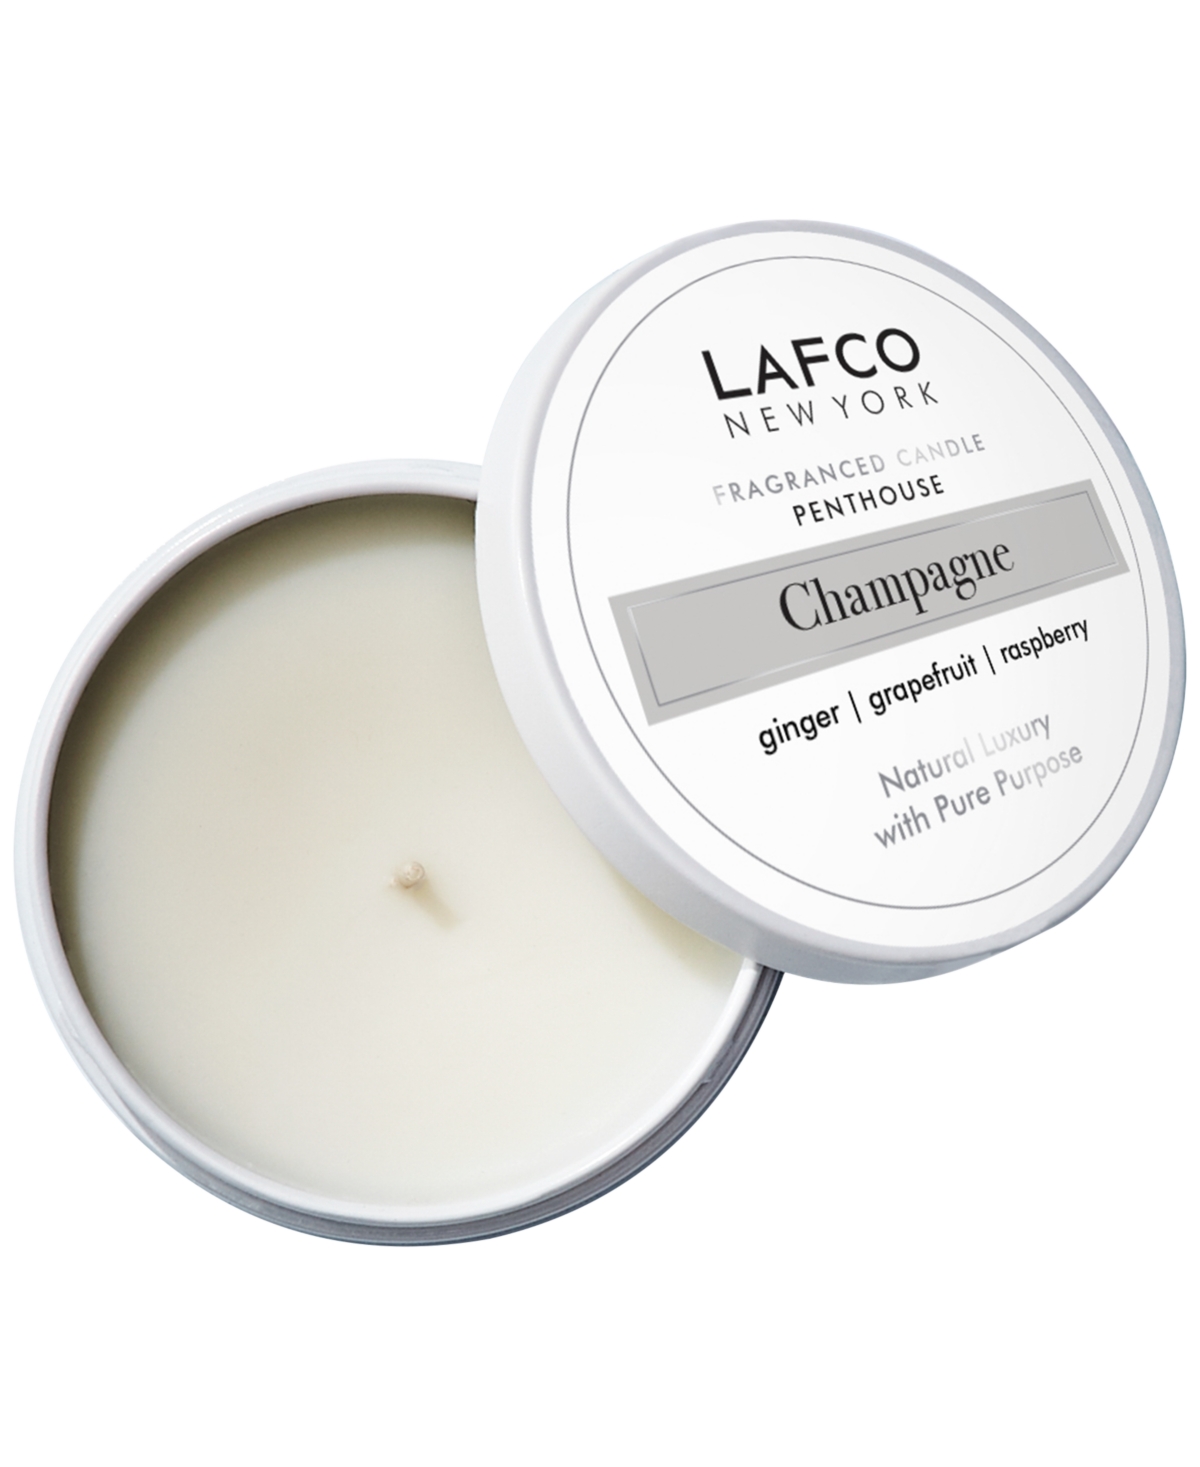 Champagne Penthouse Travel Candle, 4-oz. - White